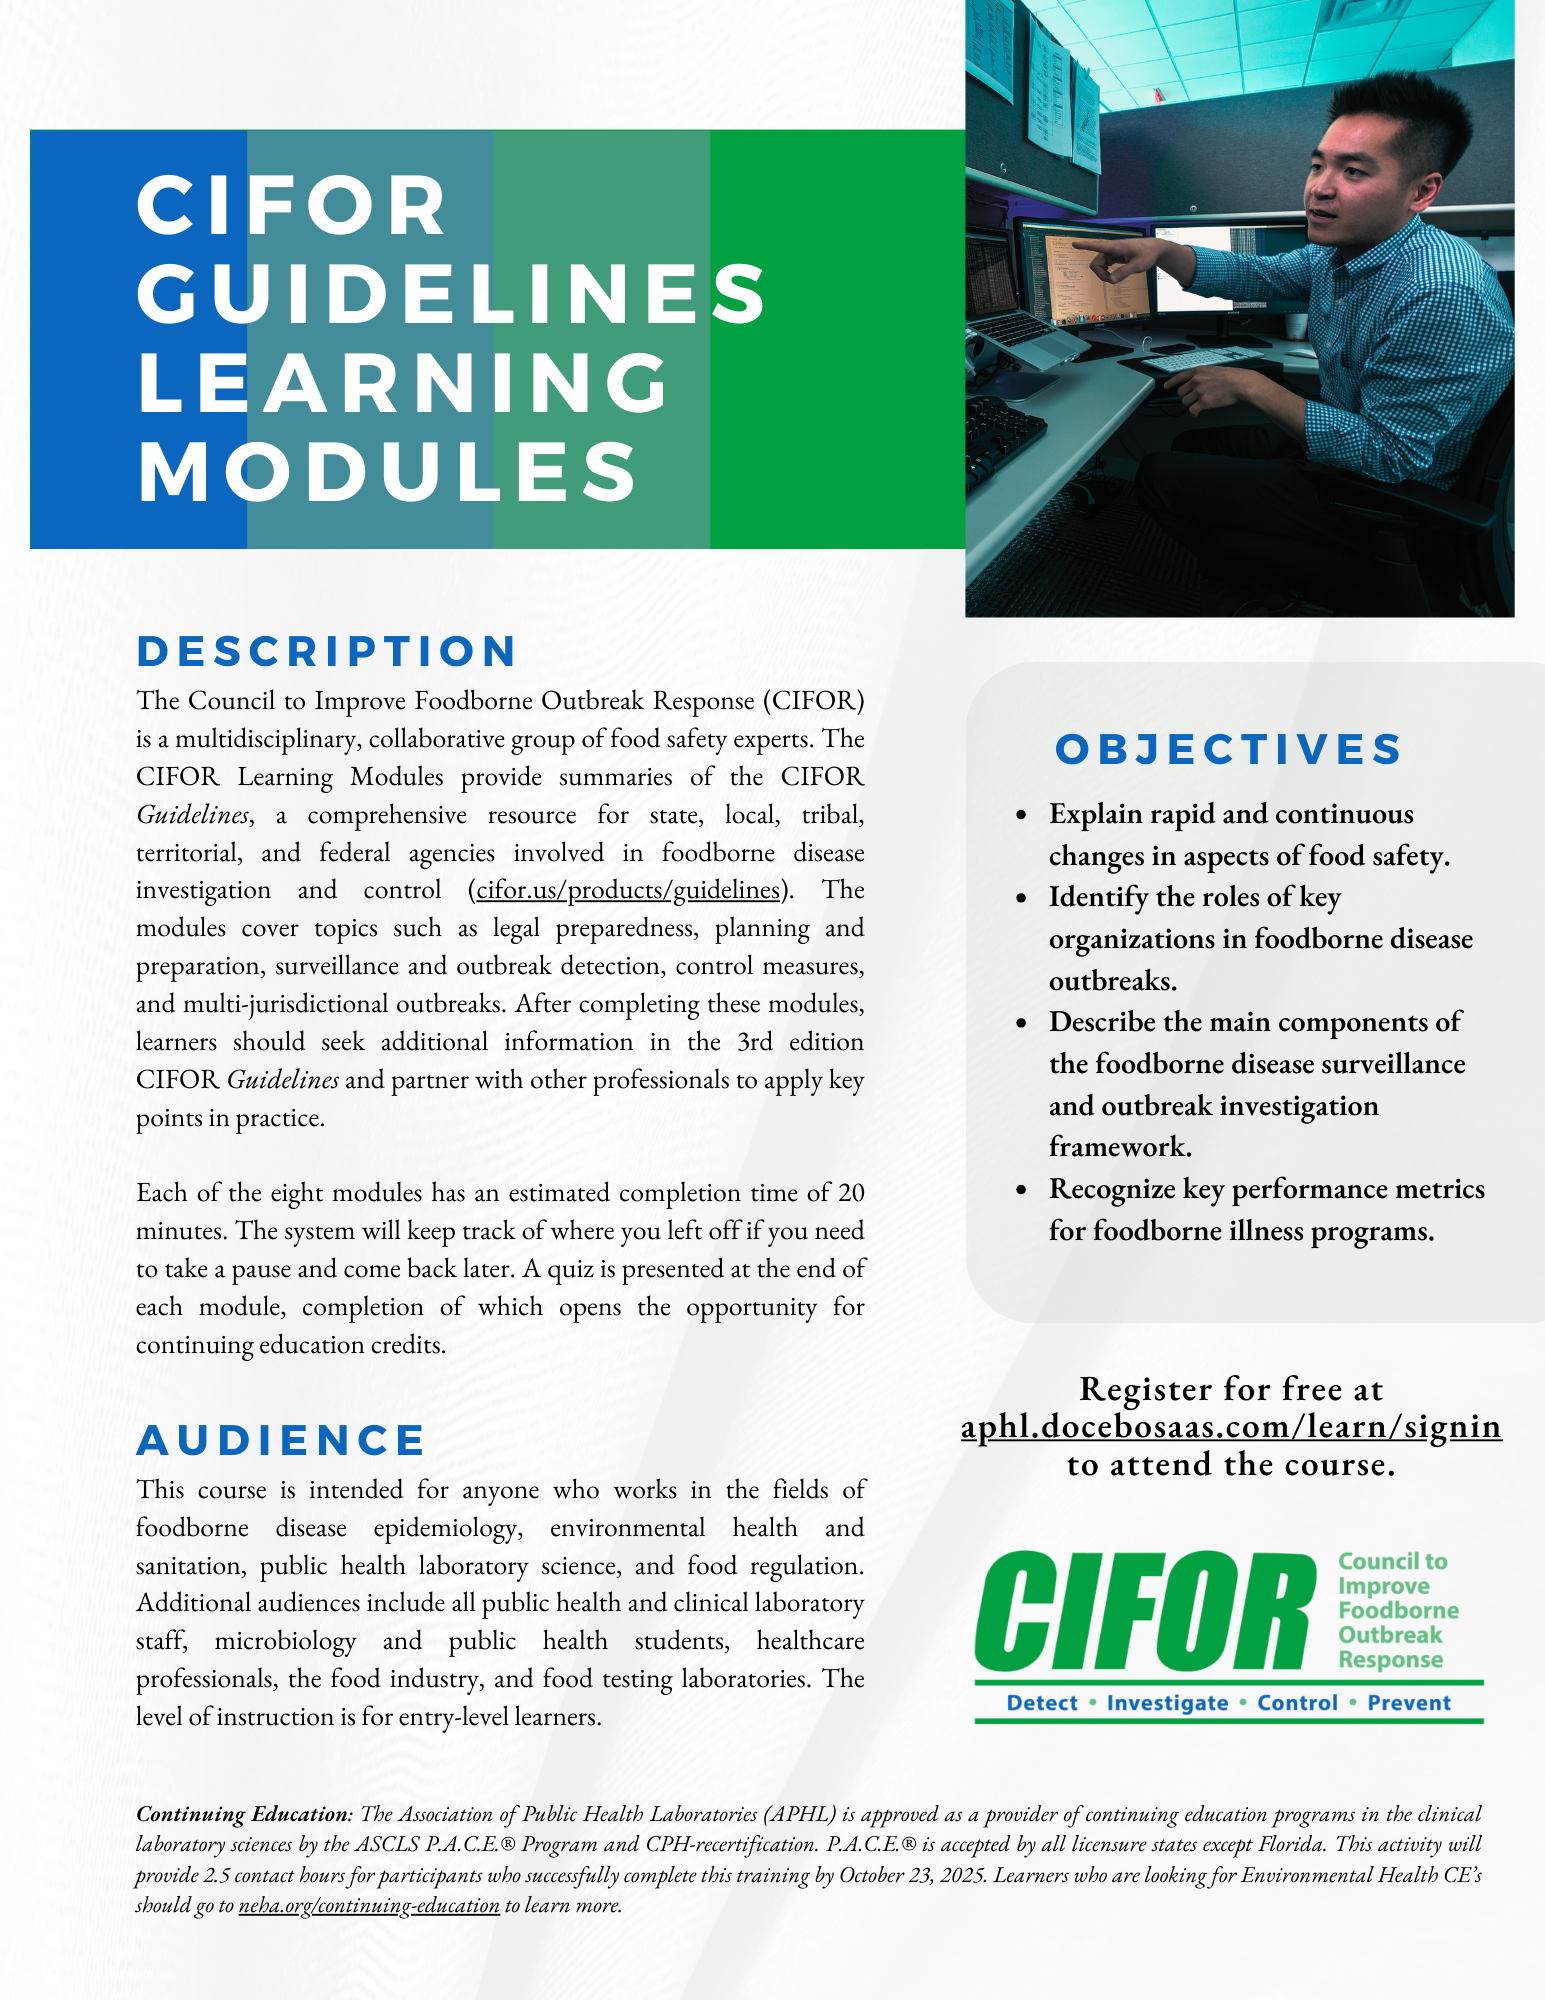 CIFOR Guidelines Learning Modules